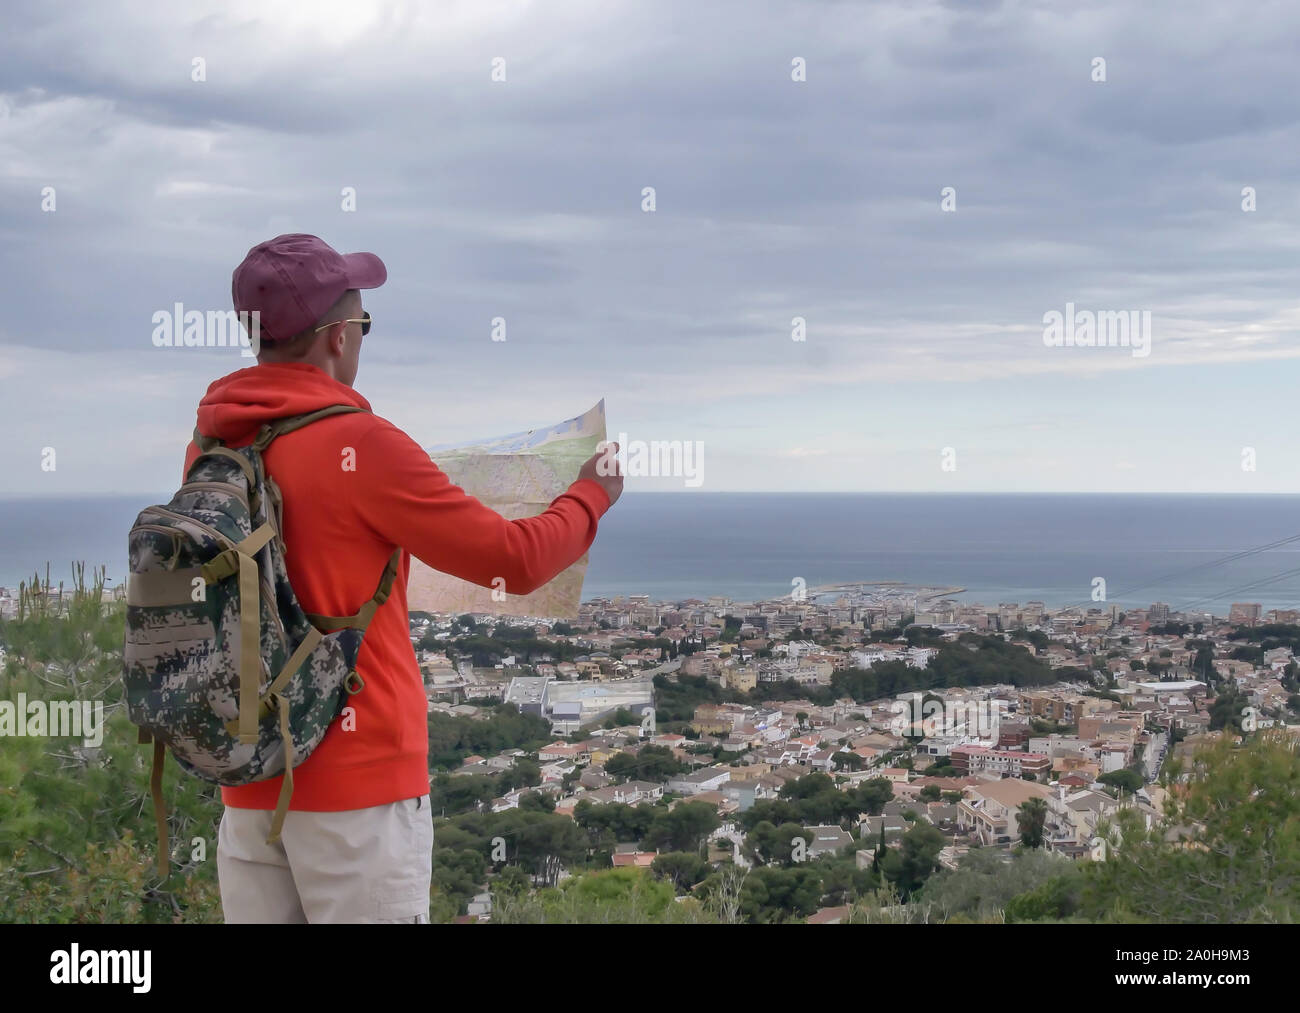 Traveler guy with a map examines the area, a beautiful city by the sea, against a cloudy sky Stock Photo